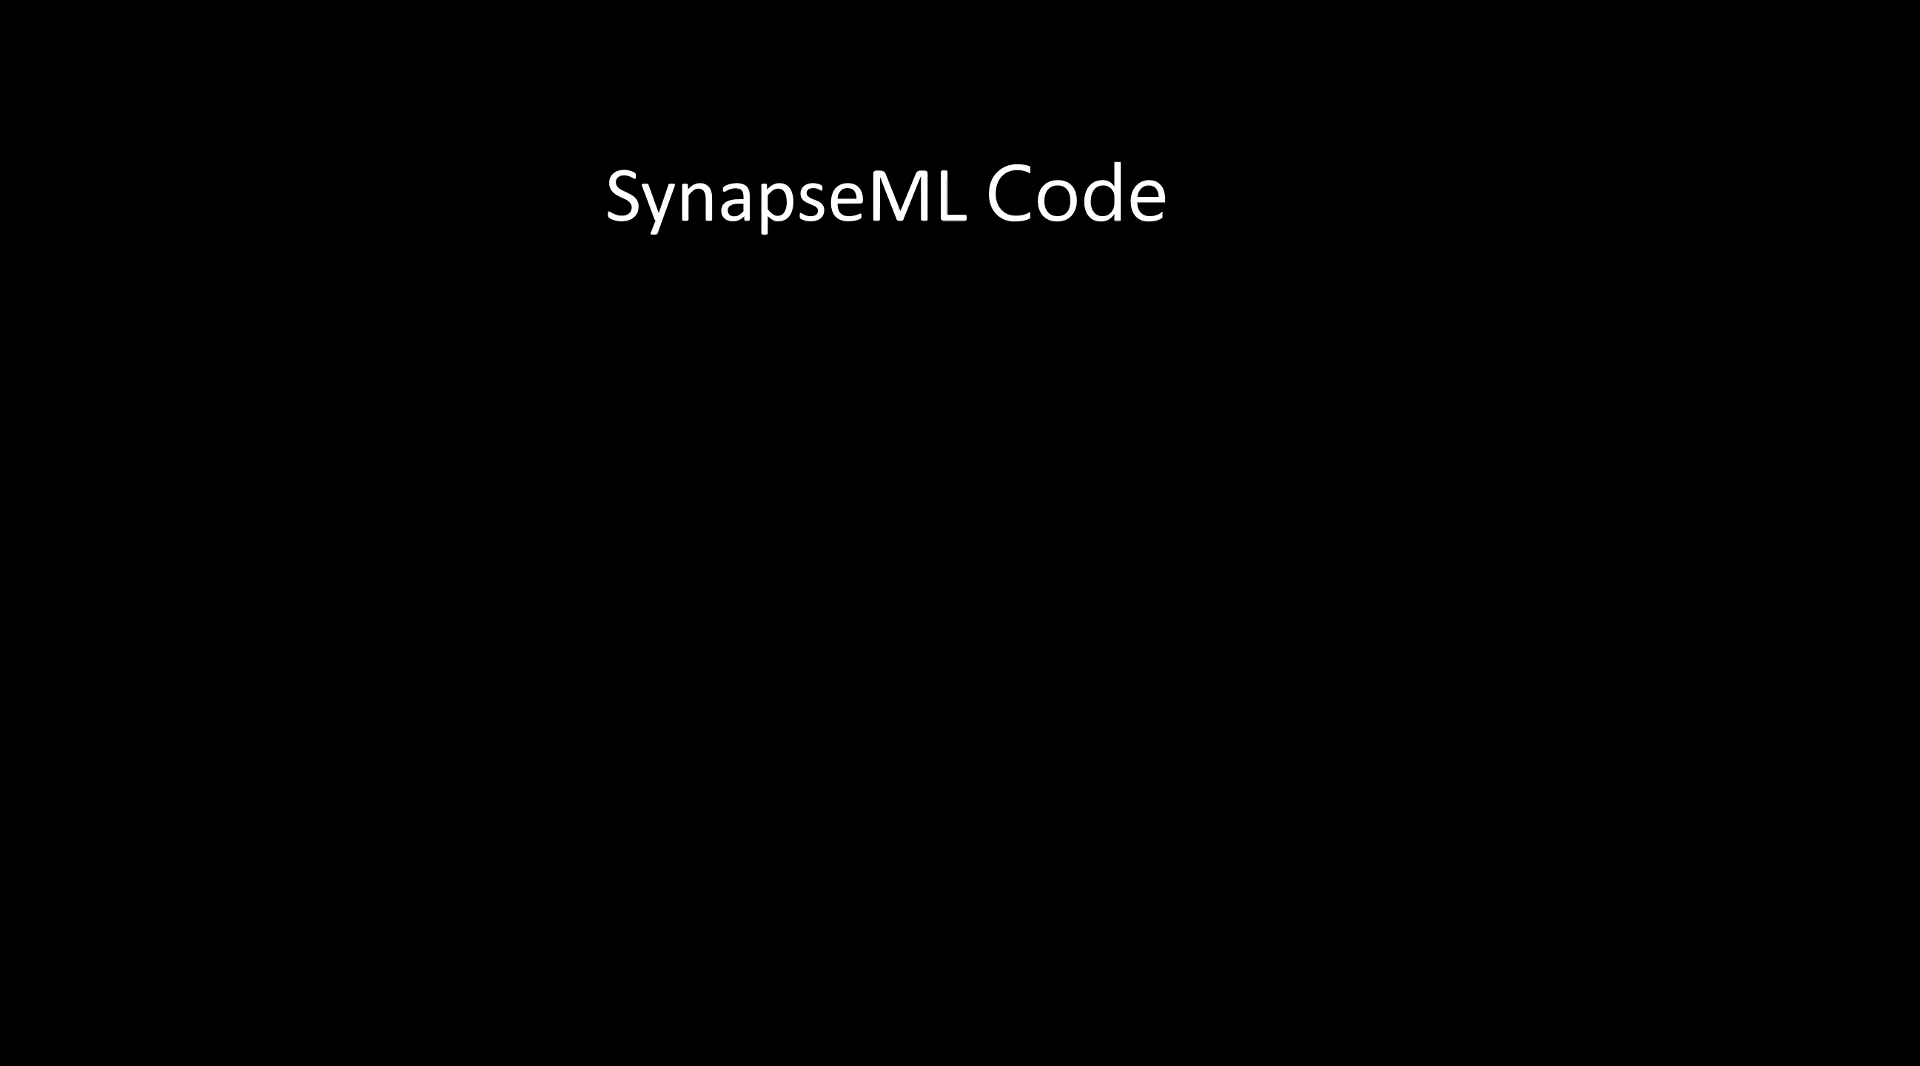  An animation illustrating SynapseML’s integration between ONNX and Spark abstracts several key performance optimizations to allow model inference on terabytes of data. It automatically handles distributing ONNX models to worker nodes, batching and buffering input data for high throughput, and scheduling work on hardware accelerators.
